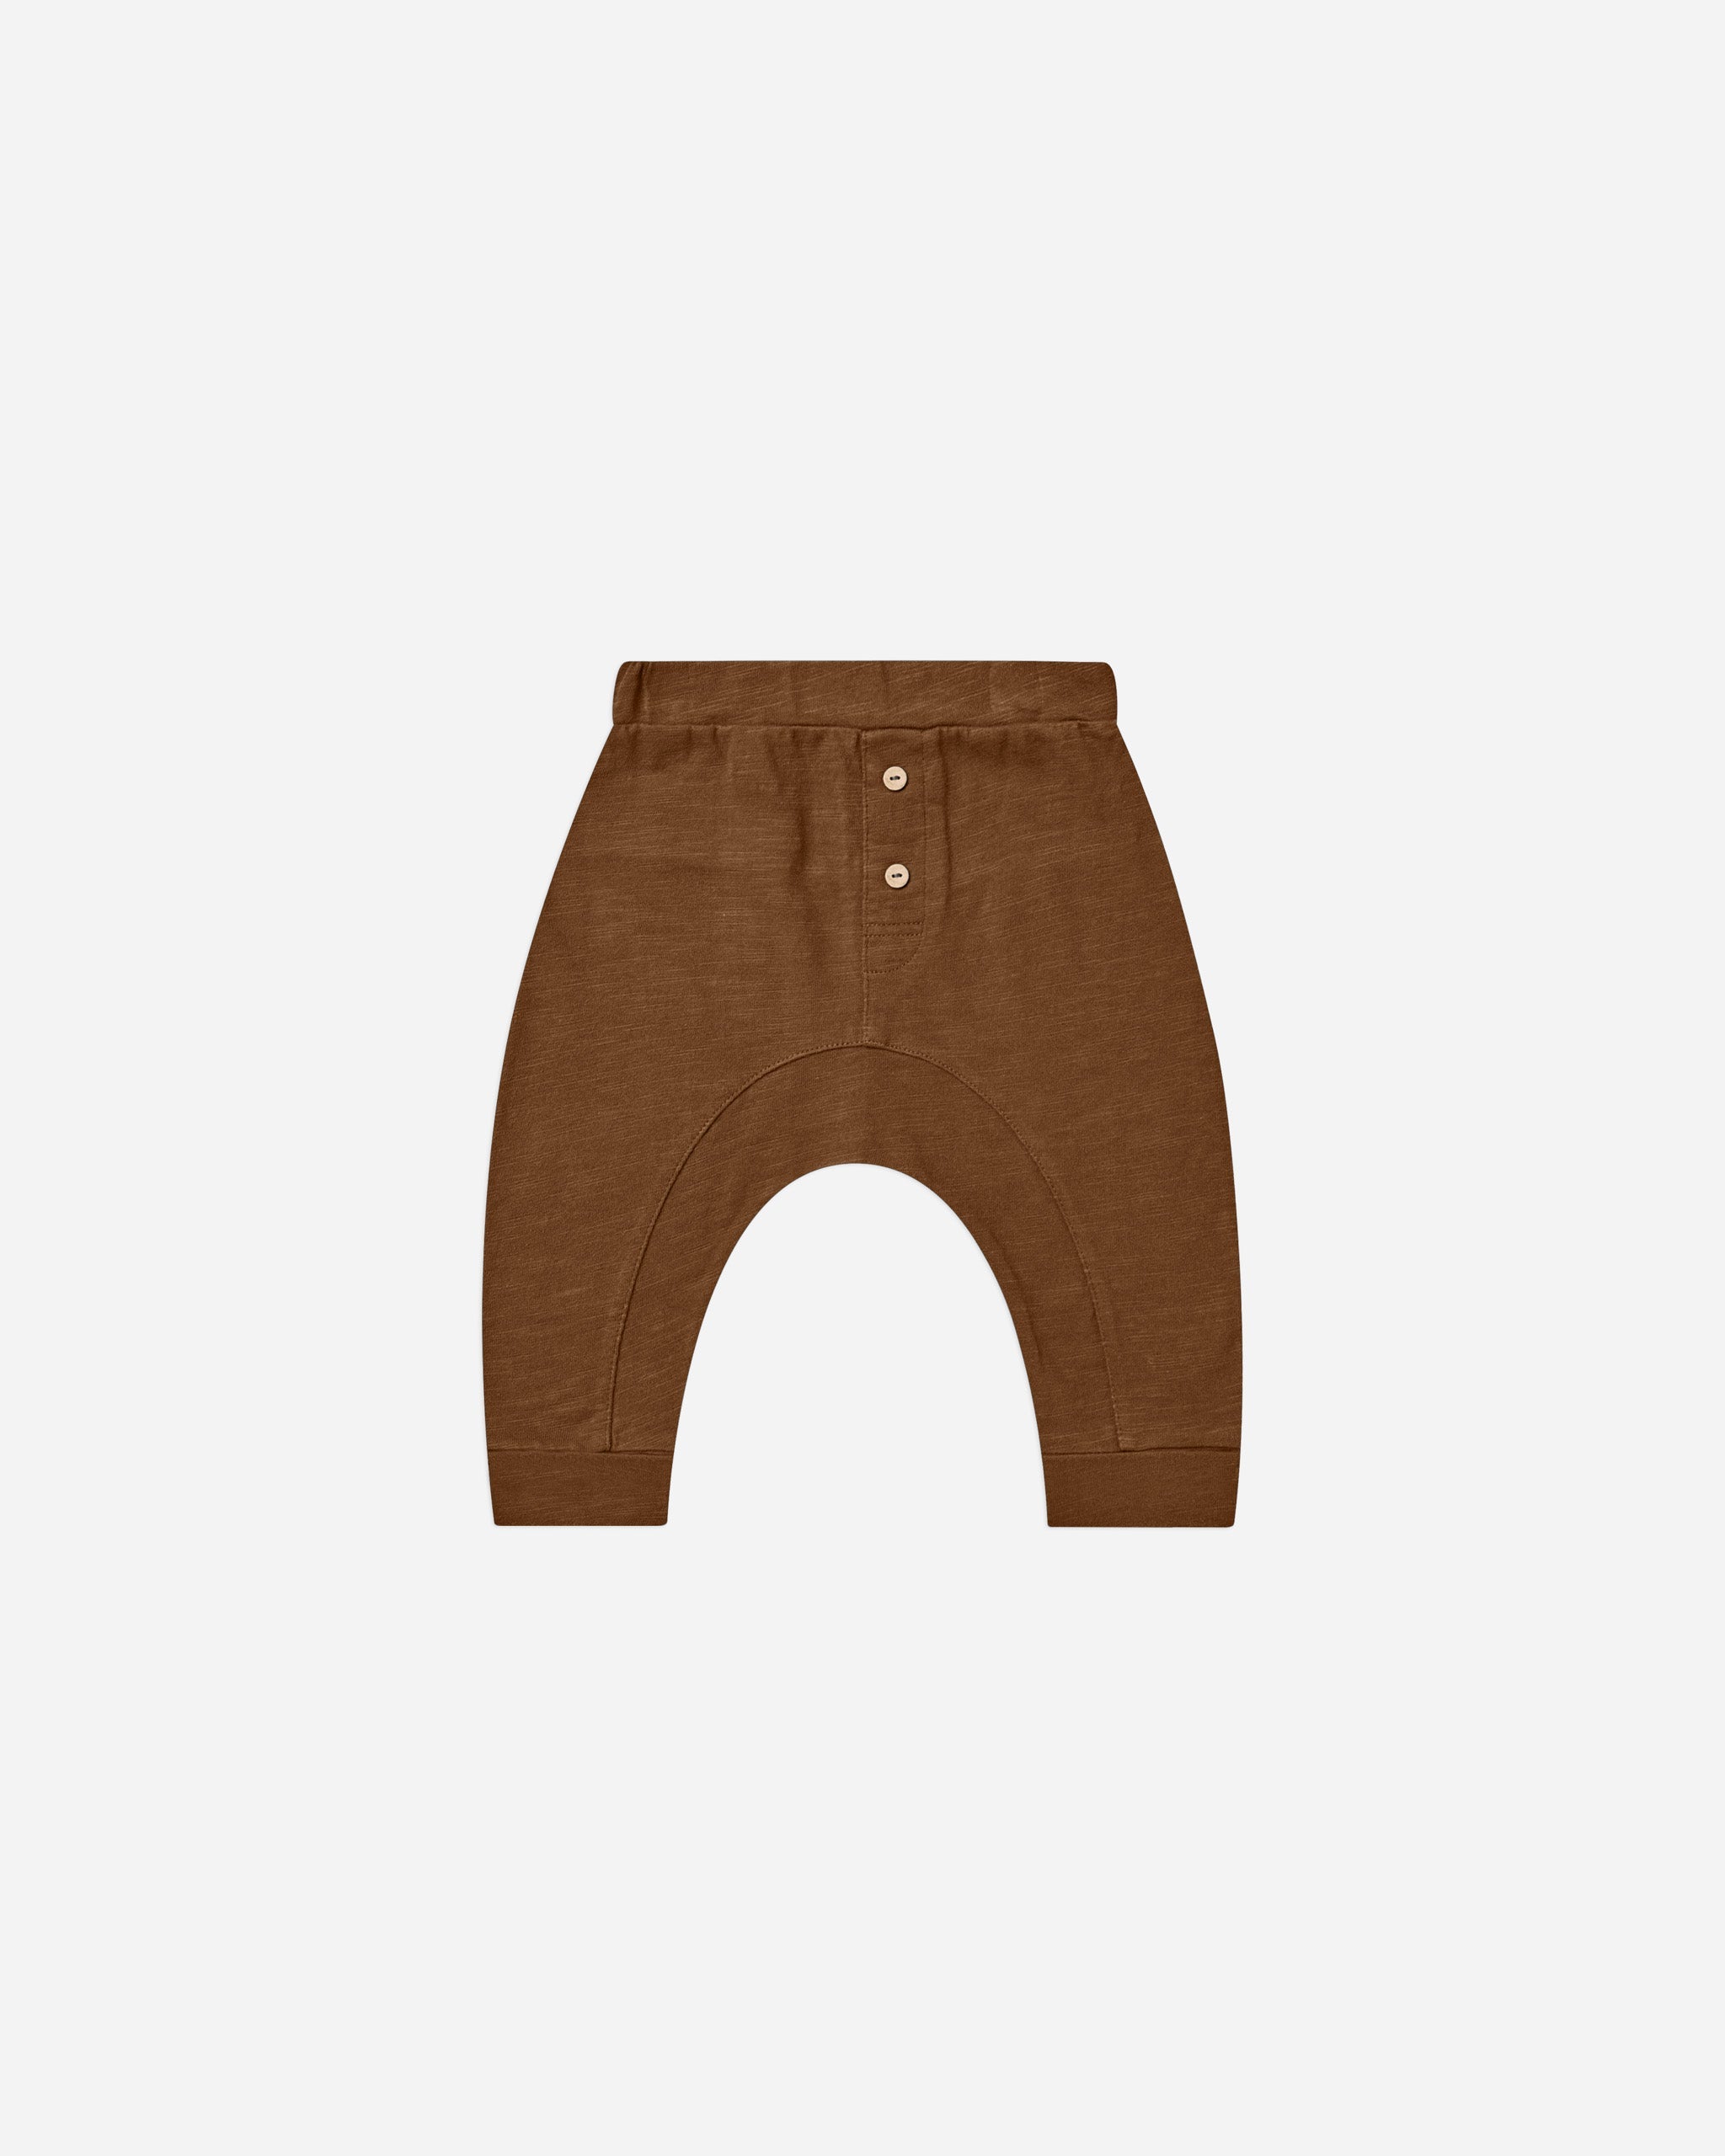 baby cru pant || chocolate - Rylee + Cru | Kids Clothes | Trendy Baby Clothes | Modern Infant Outfits |